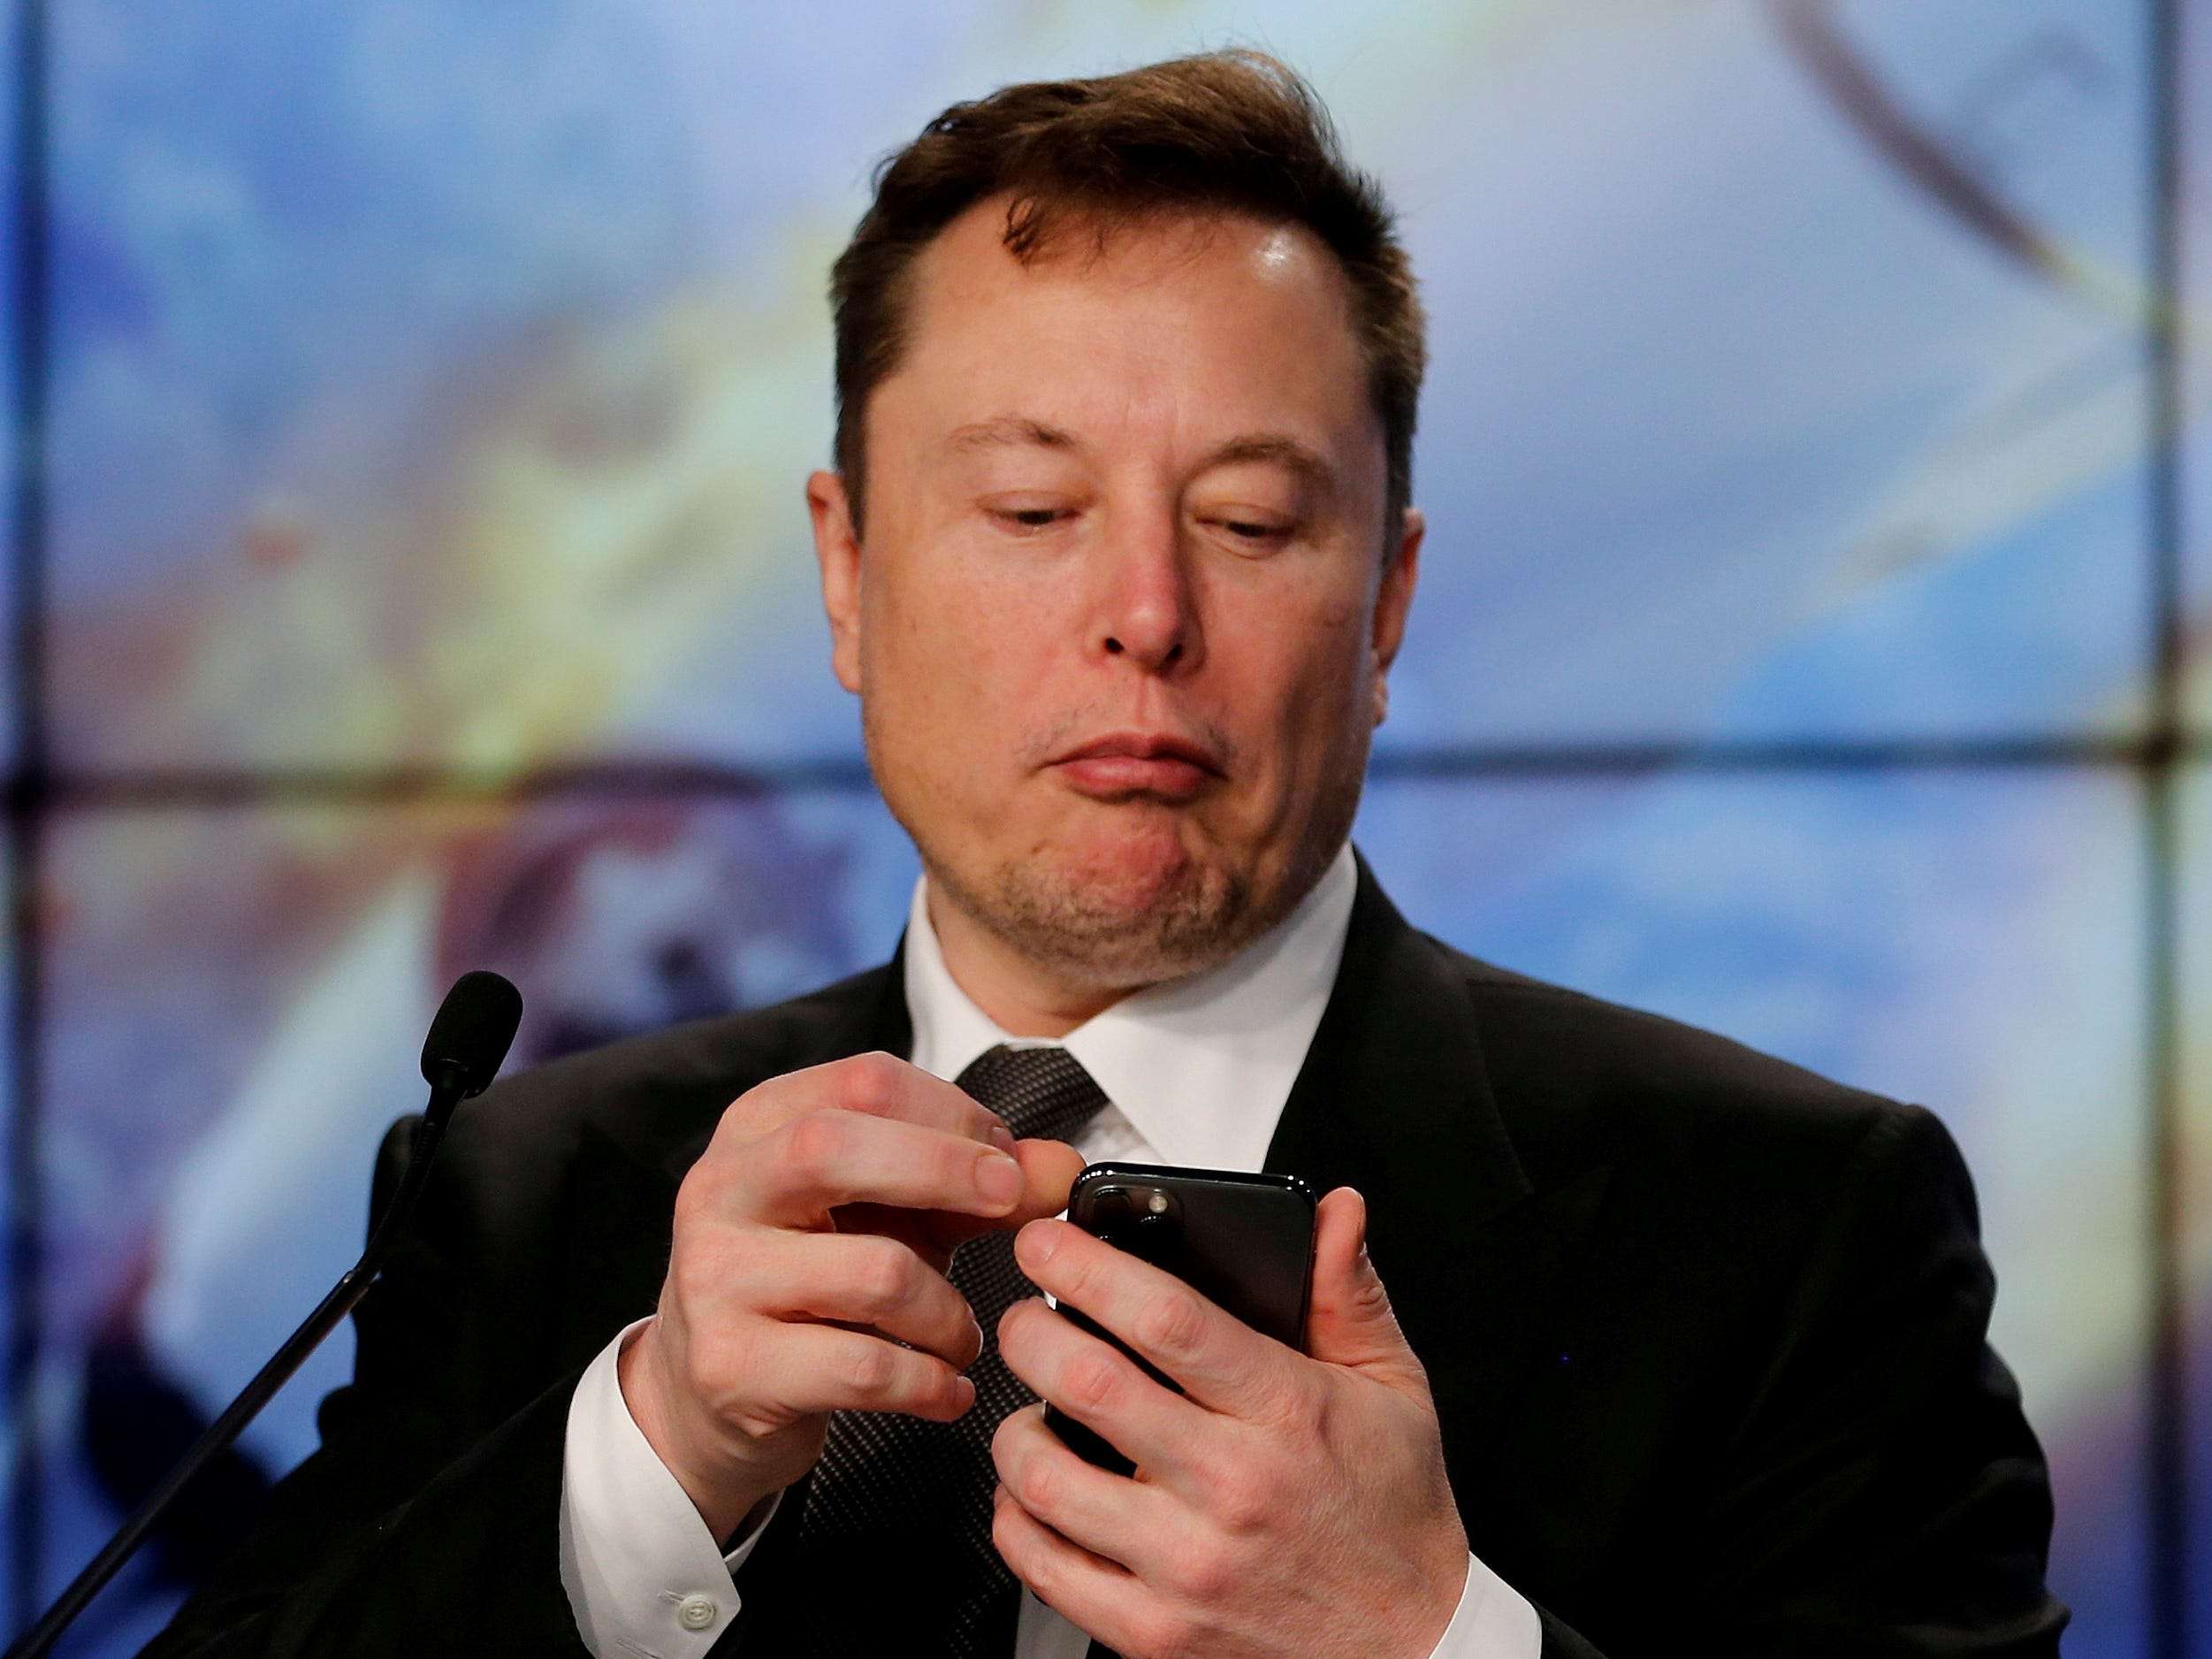 The Sec Told Tesla Twice That Elon Musks Tweets Violated Court Orders Requiring Preapproval 7039